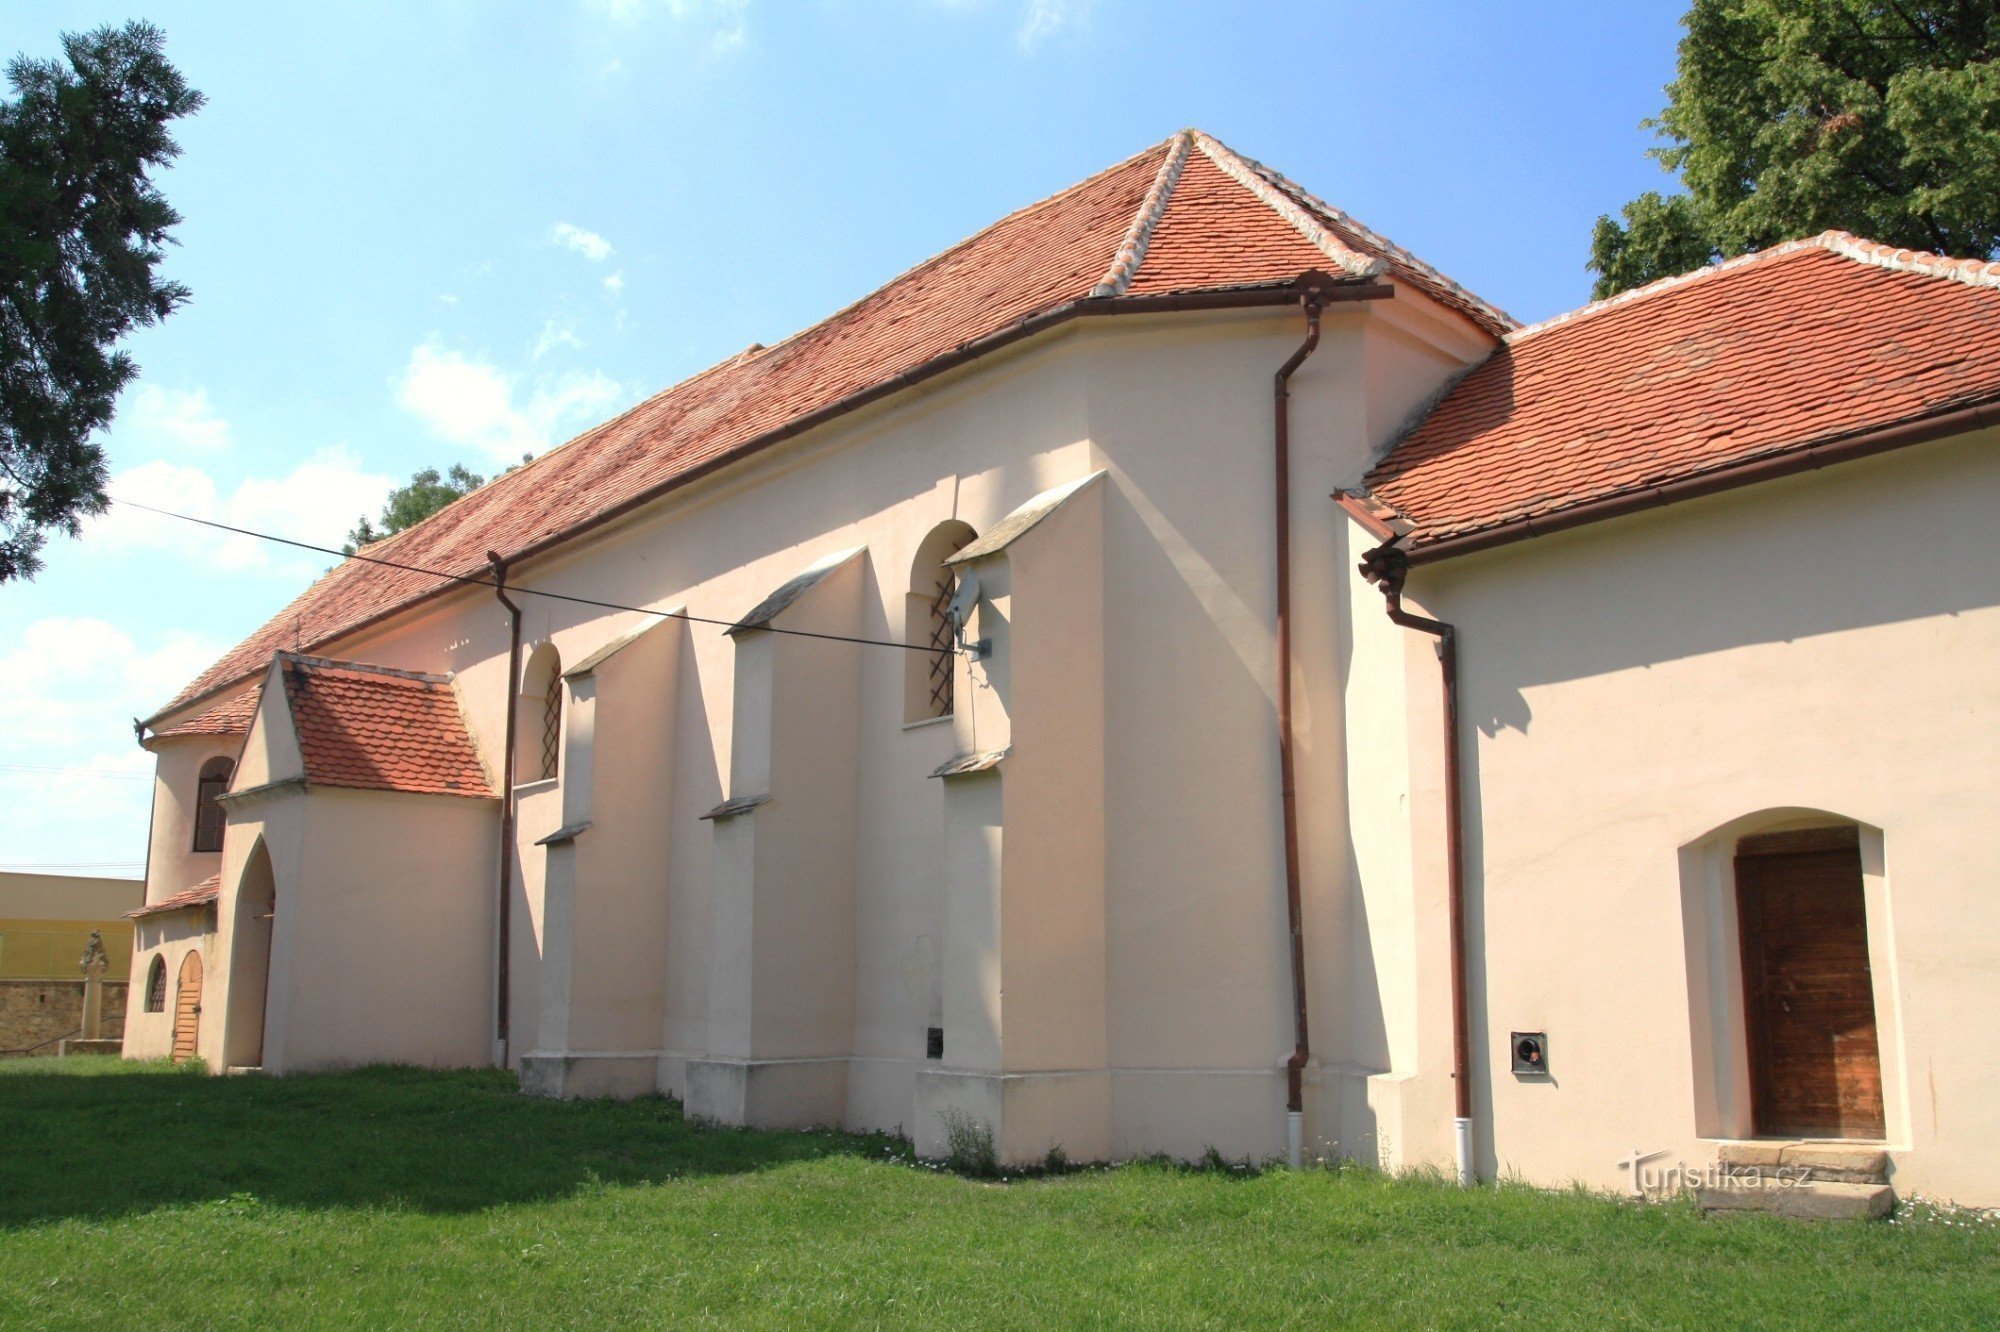 Přítluky - church of St. Markets from the east